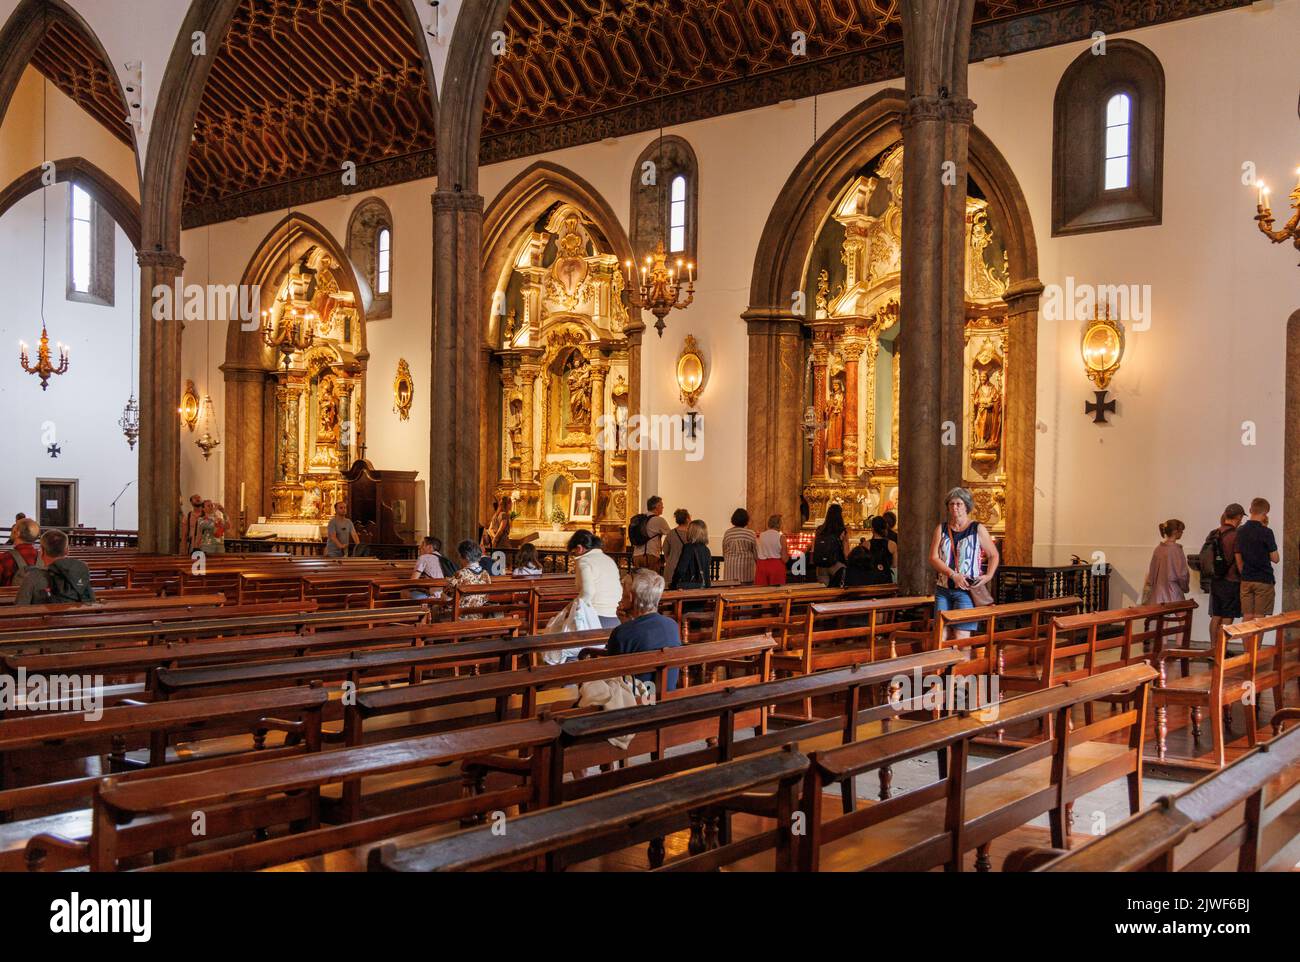 Interior of the cathedral of Our Lady of the Assumption, Funchal, Madeira, Portugal Stock Photo